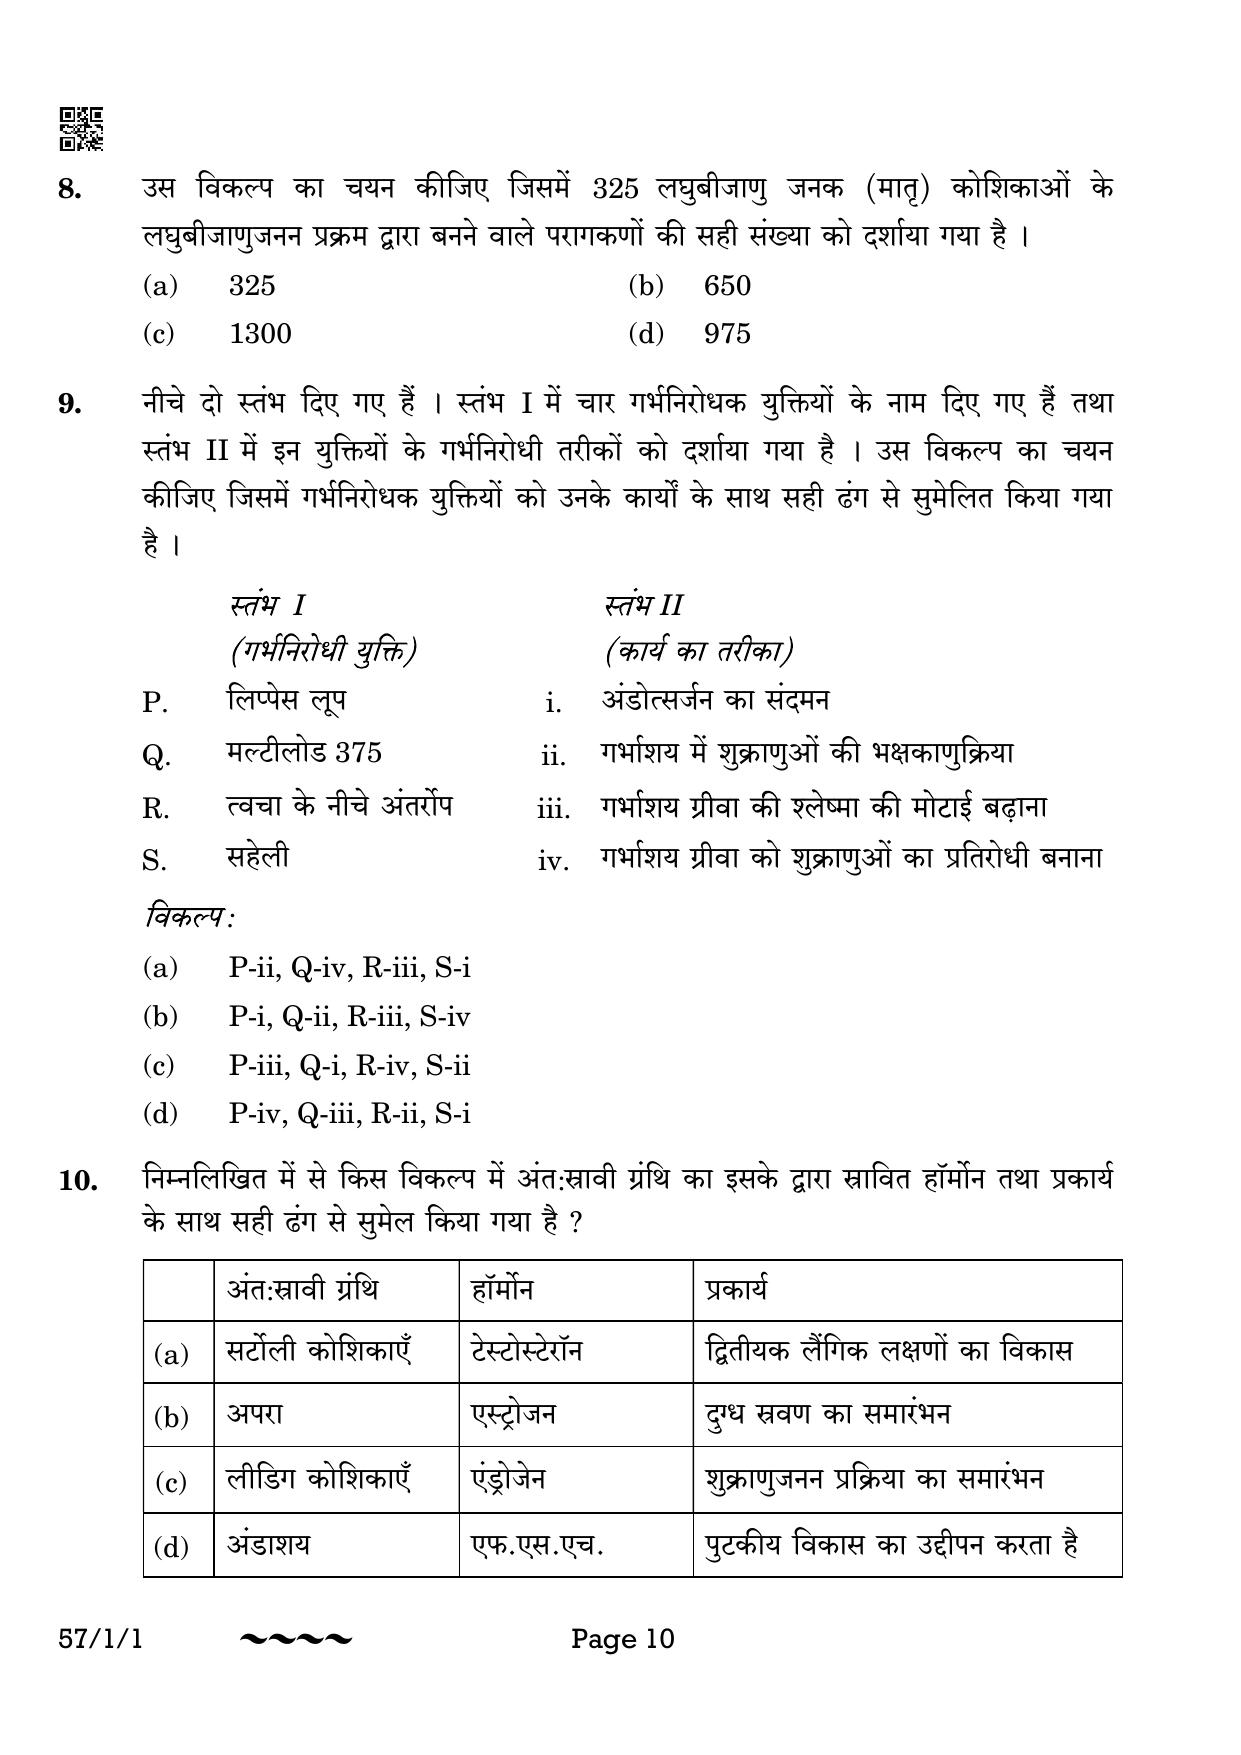 CBSE Class 12 57-1-1 Biology 2023 Question Paper - Page 10